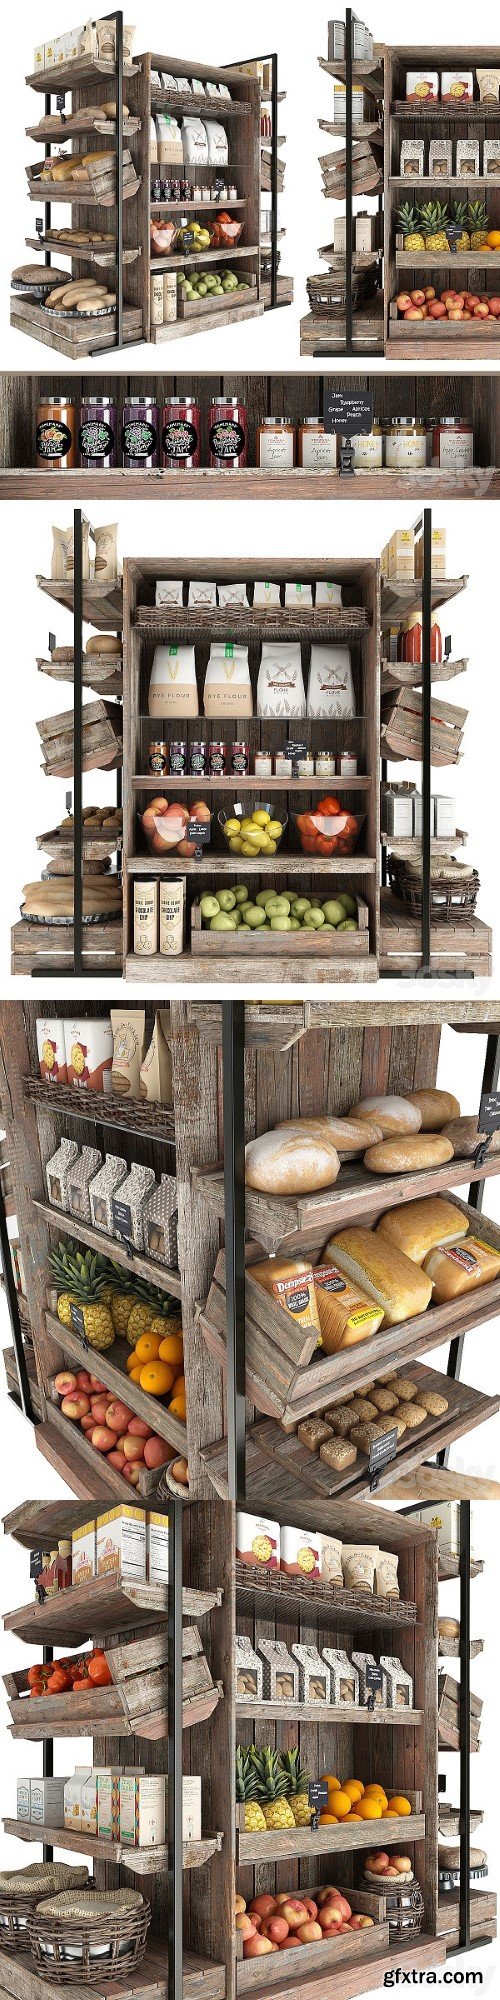 Shelves With Products 00001